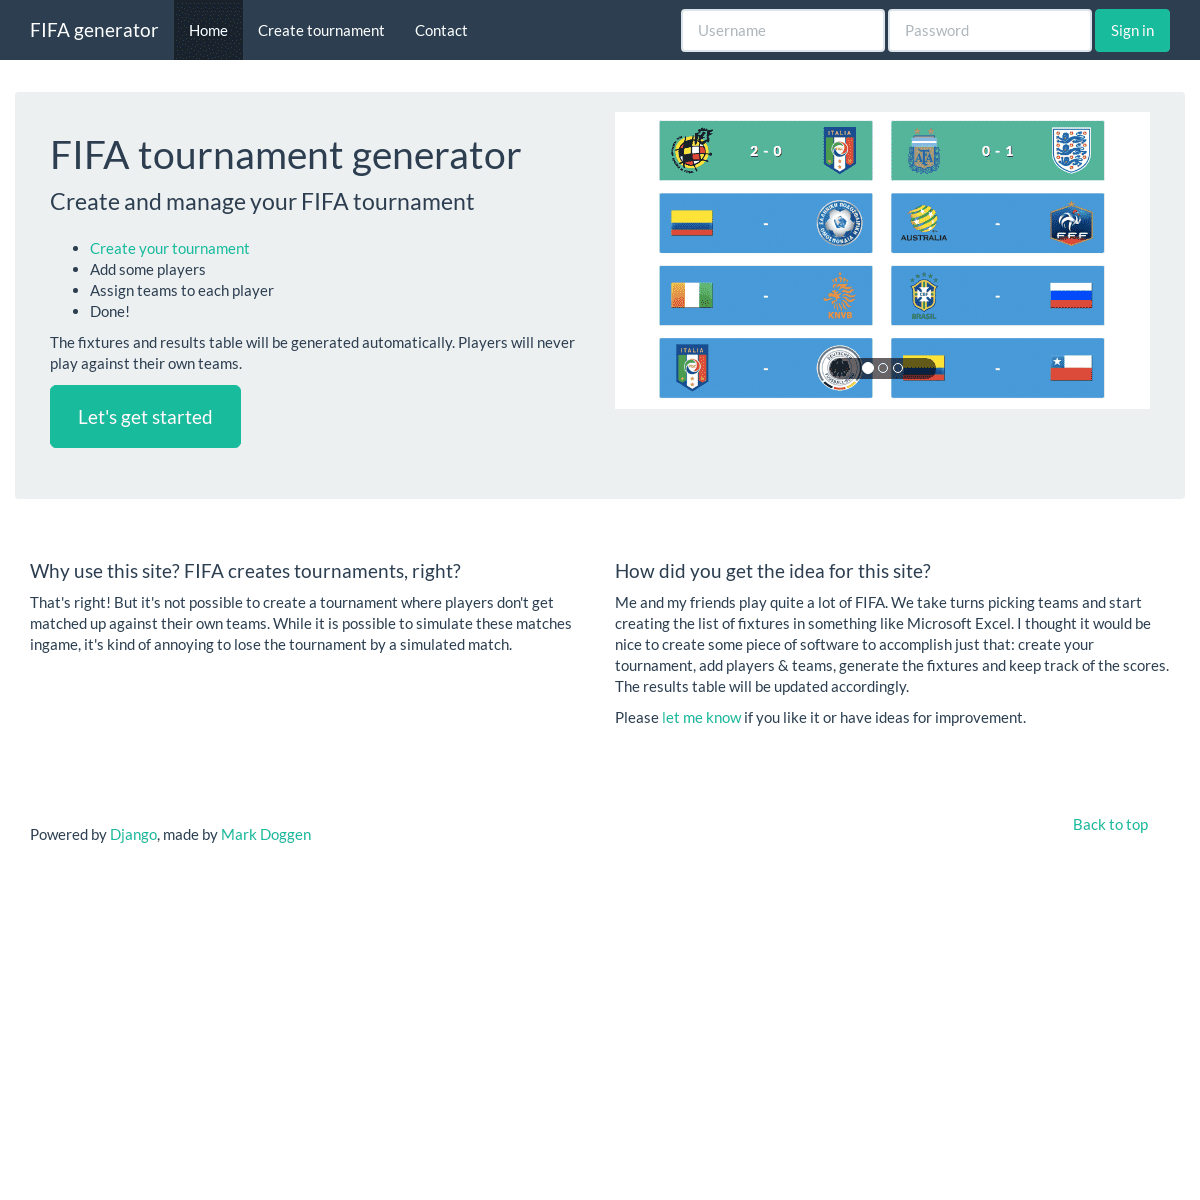 A complete backup of fifagenerator.com